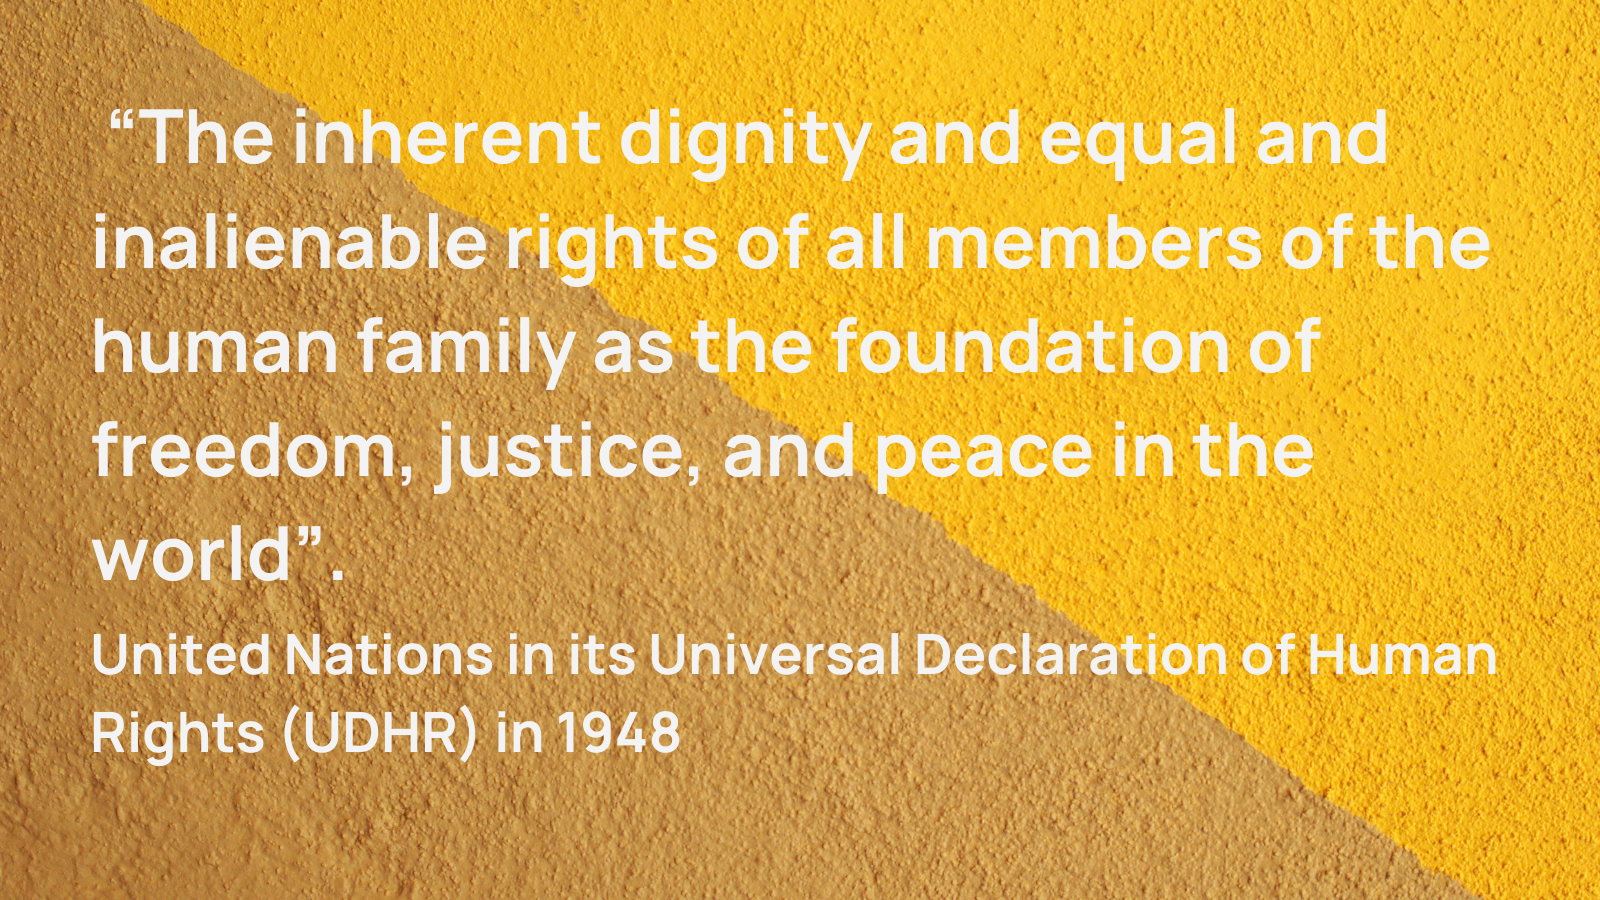 Quote from United Nations in its Universal Declaration of Human Rights (UDHR) in 1948 “The inherent dignity and equal and inalienable rights of all members of the human family as the foundation of freedom, justice, and peace in the world”.